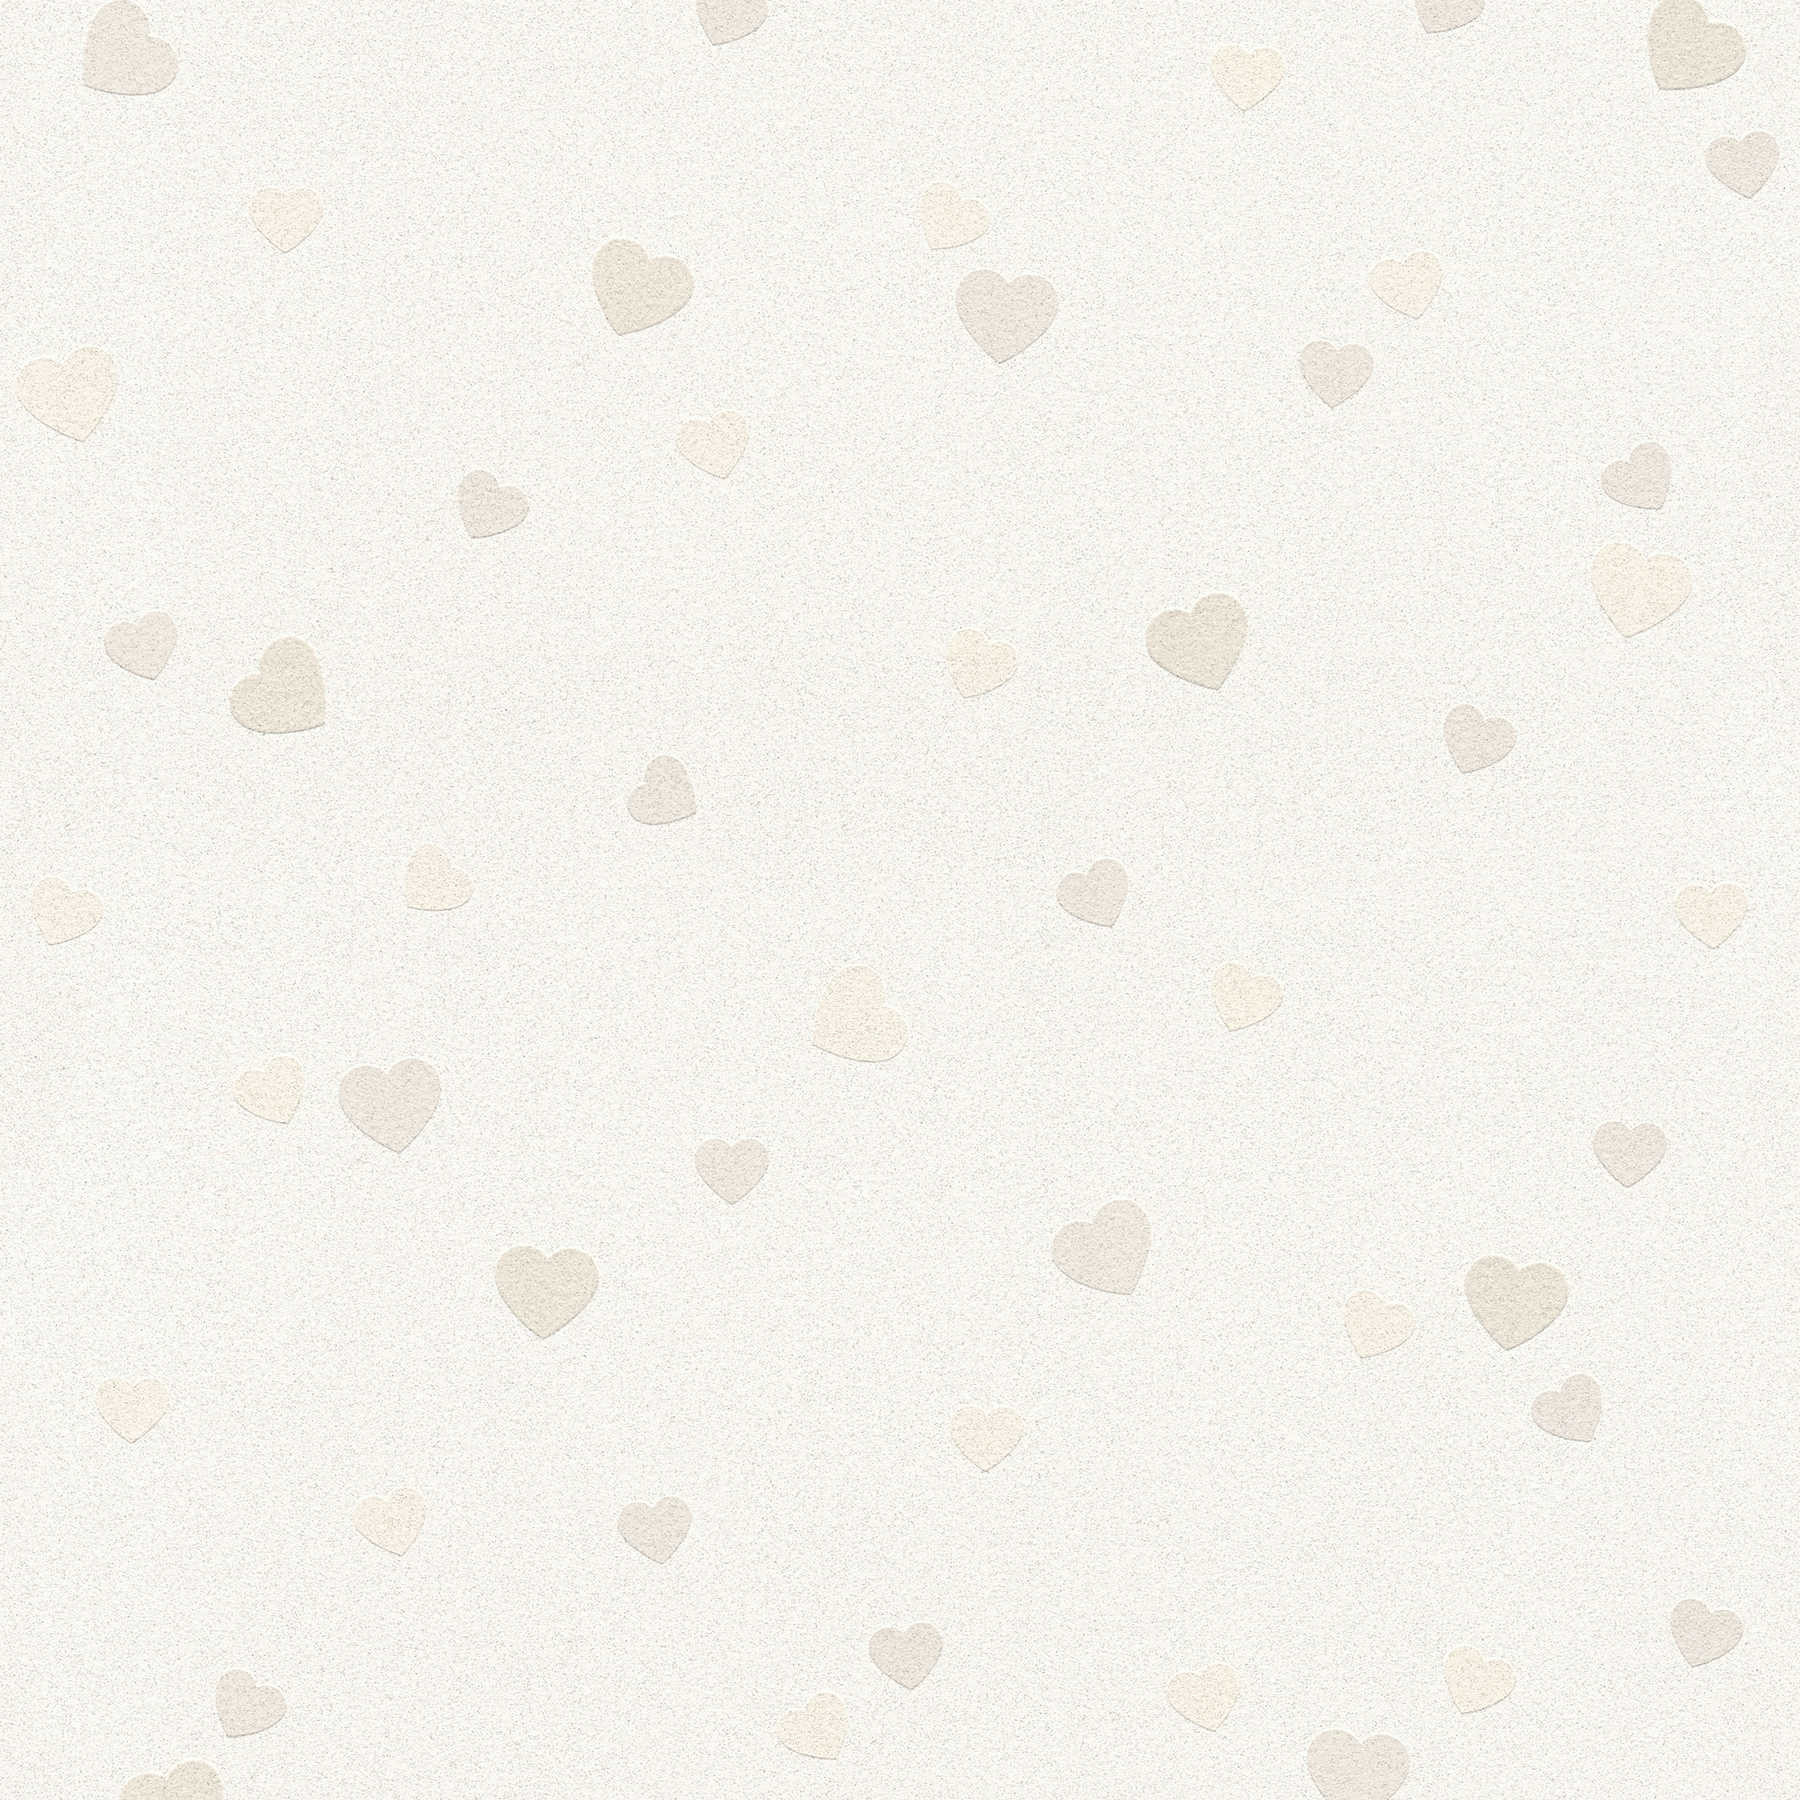         Wallpaper with hearts & gold glitter for Nursery - Beige, Cream
    